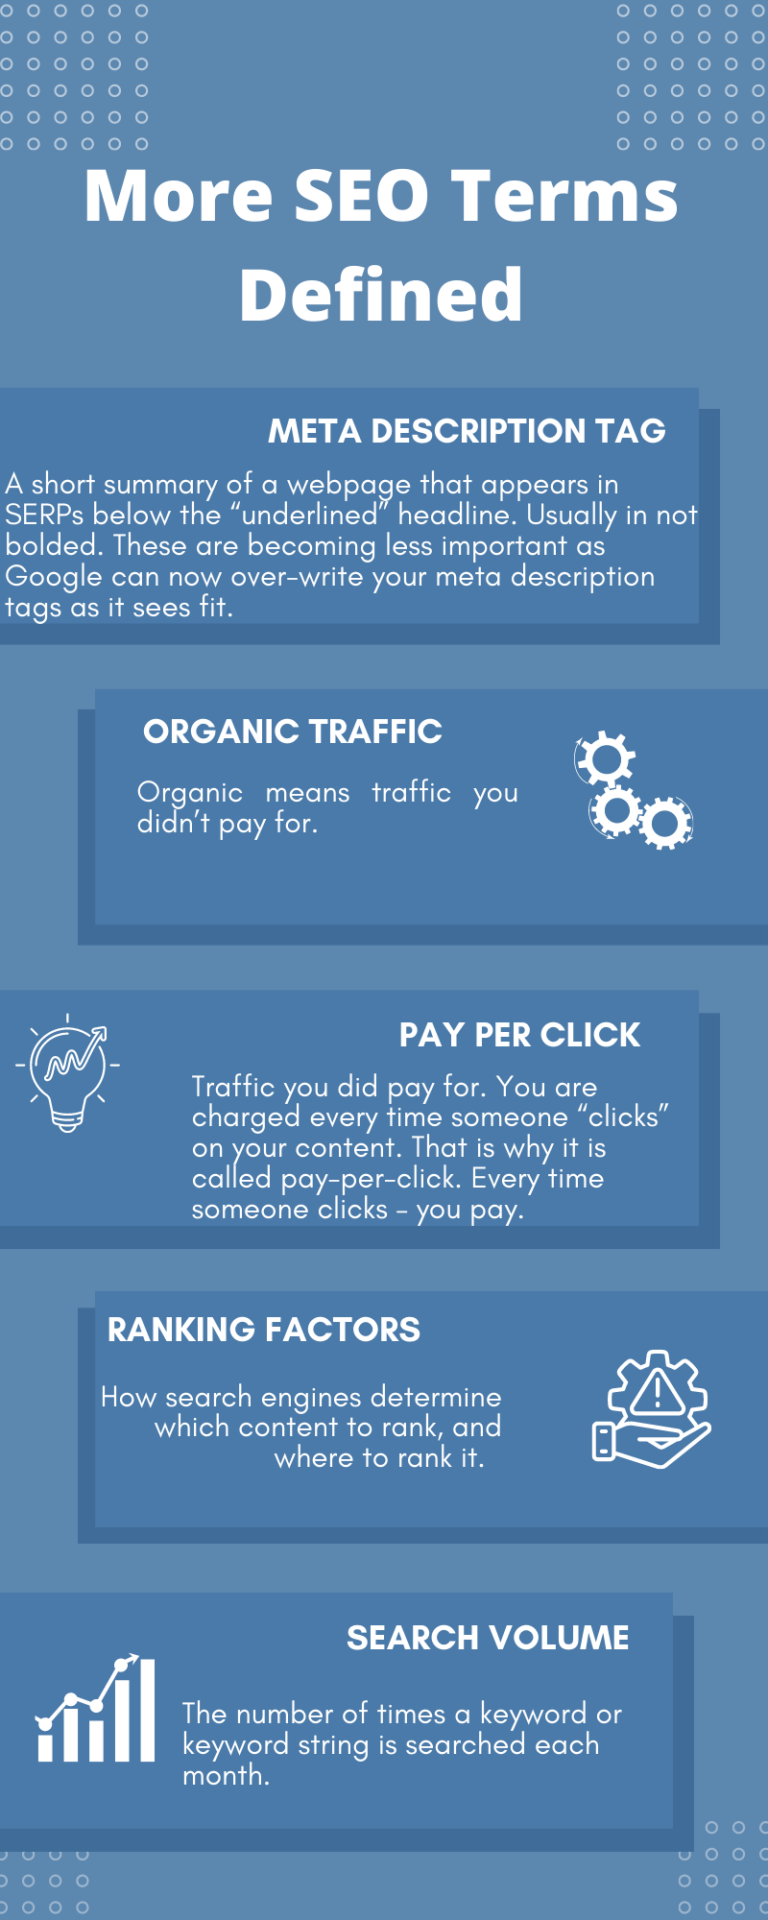 Infographic of More SEO Terms Defined